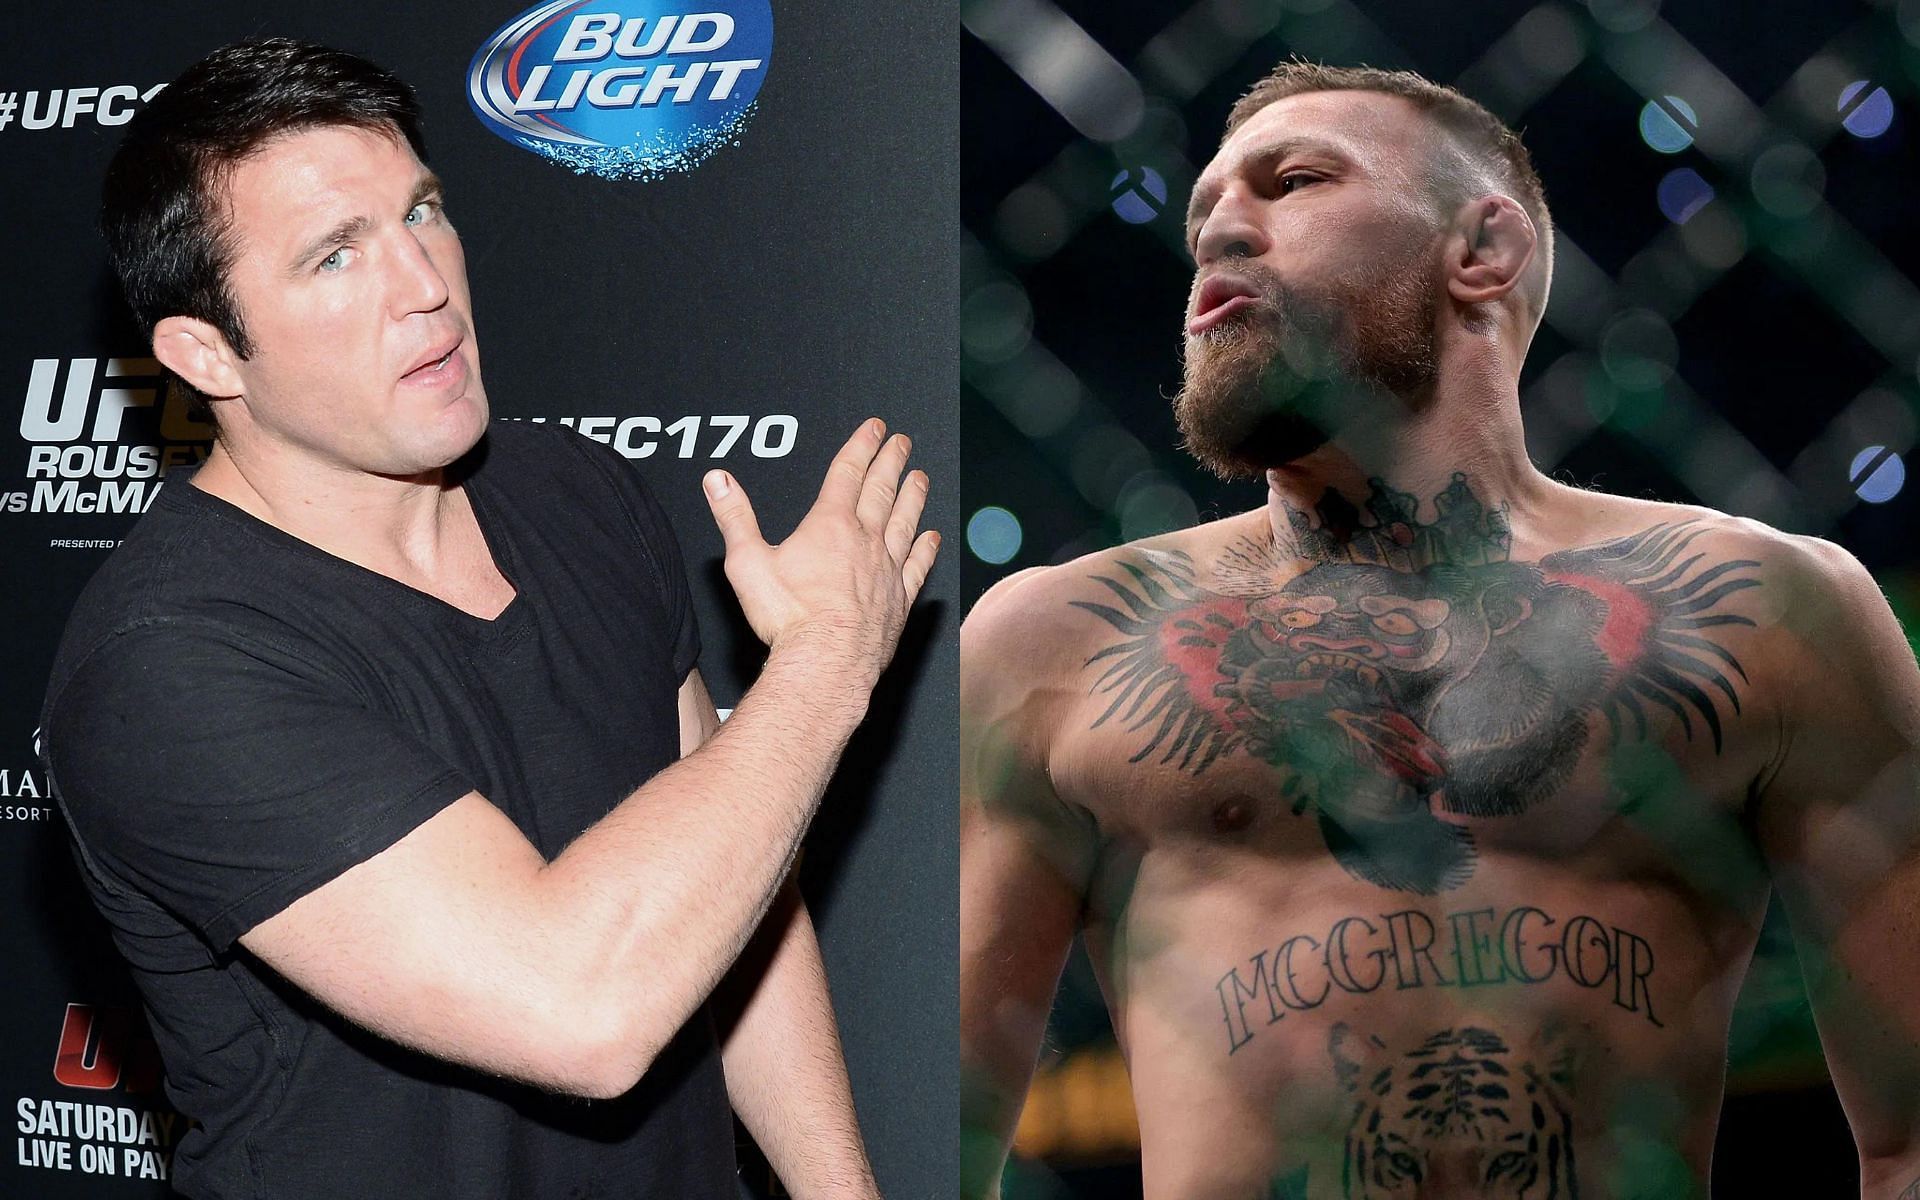 Chael Sonnen (Left) and Conor McGregor (Right) (Images courtesy of Getty)